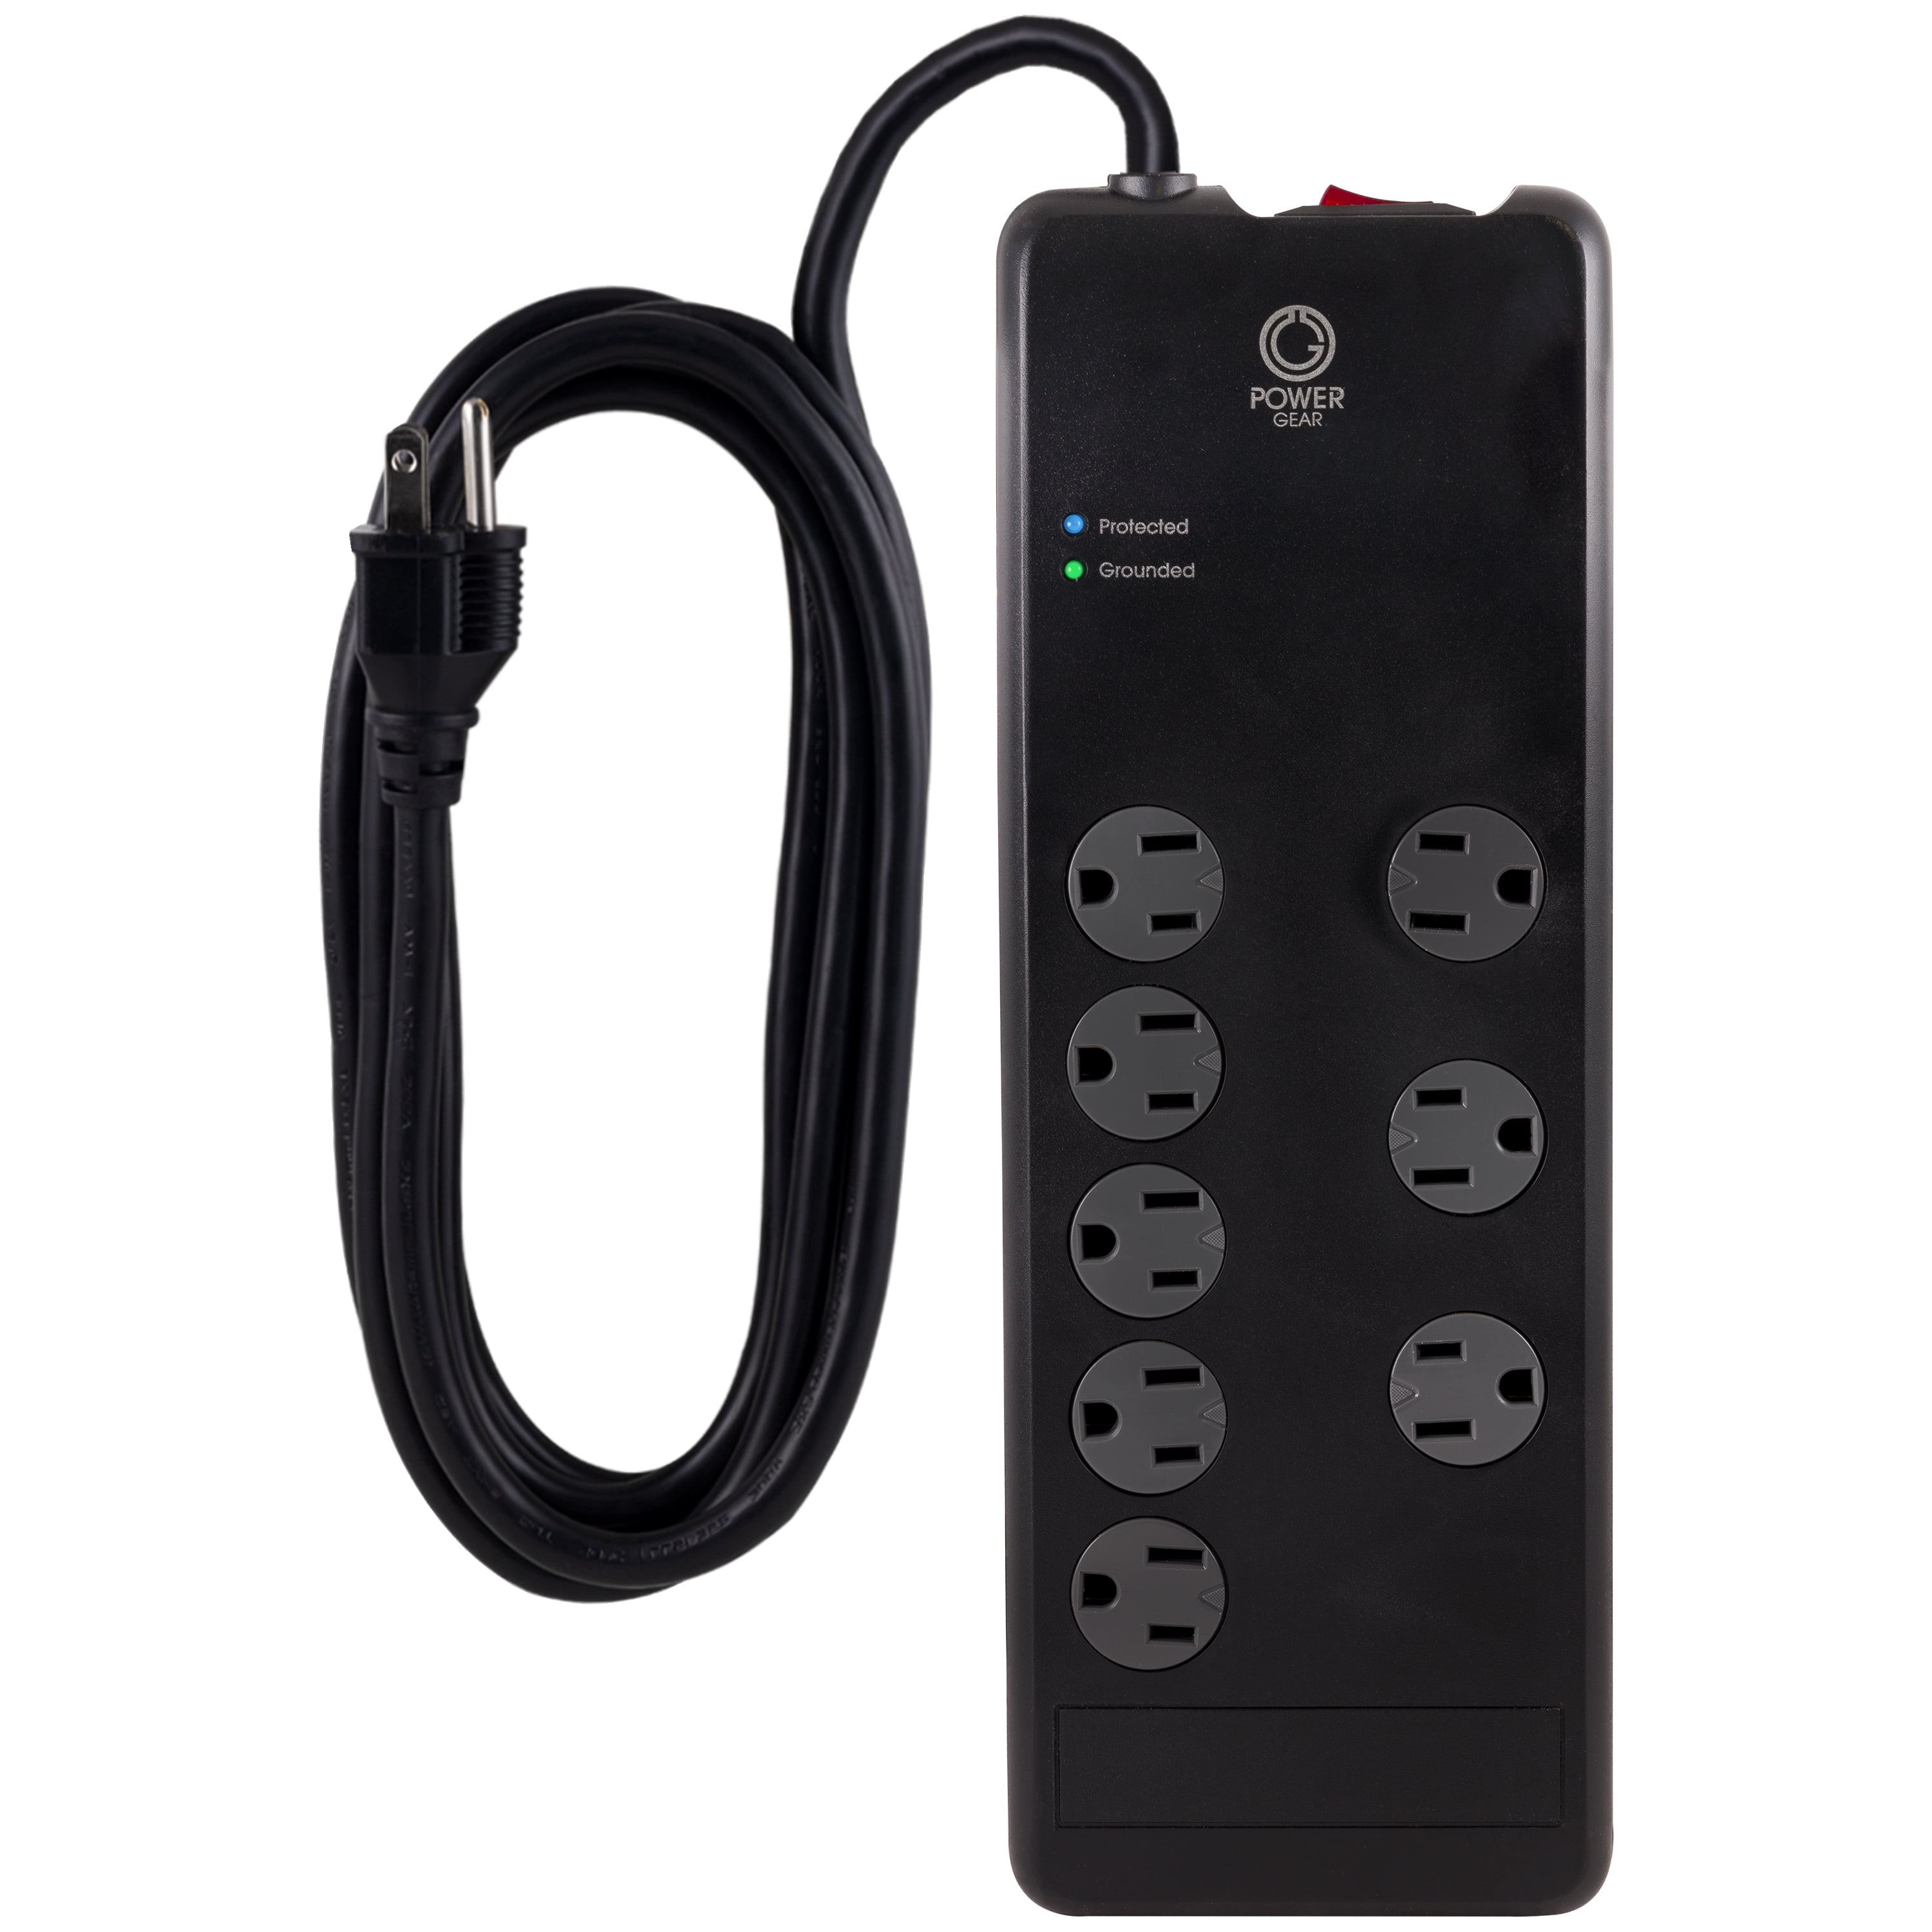 Alphaline 8 Outlet Advanced Surge Protector 2160 joules NEW in Box 057-3207 6ft 